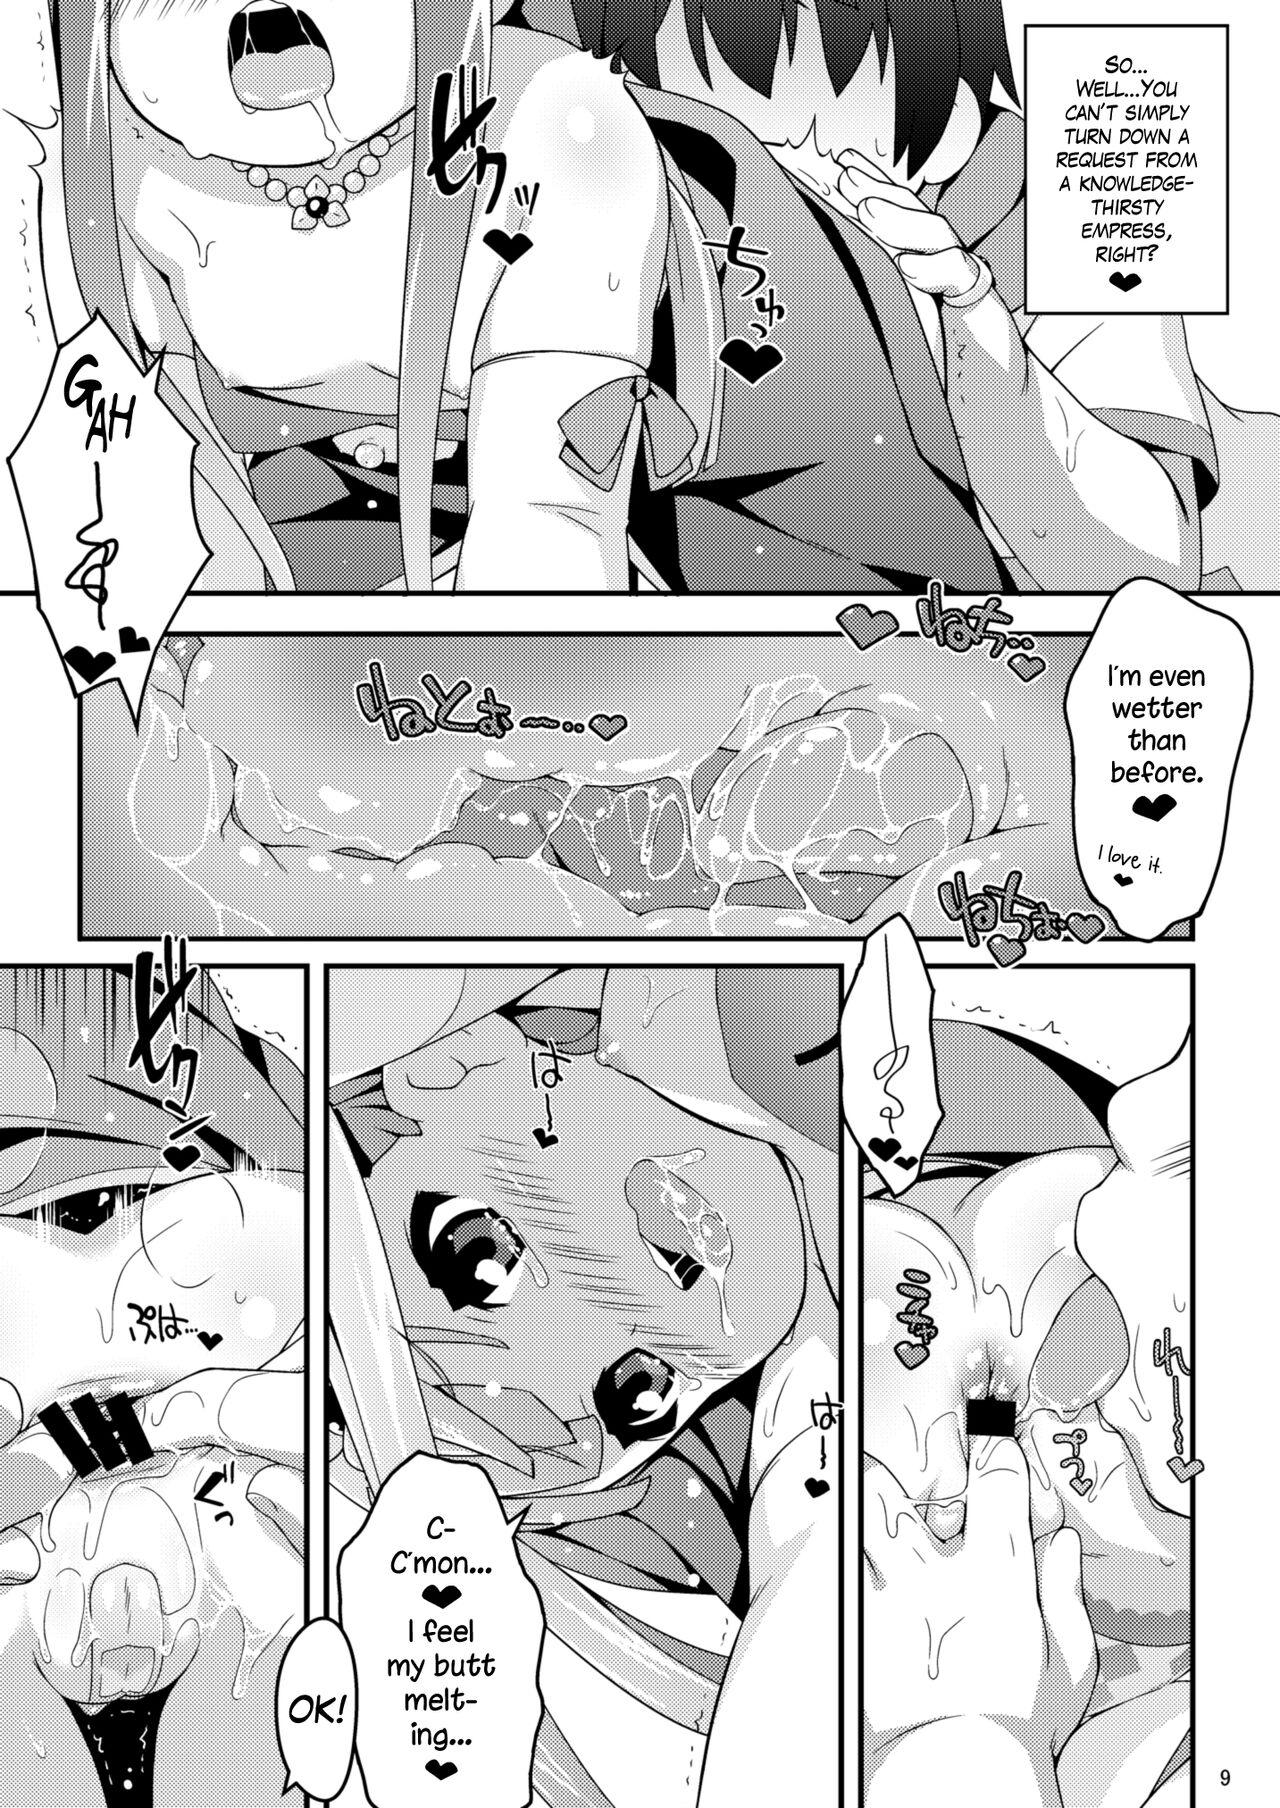 Calle Petralka to Anal Company | PetralkAnal Company - Outbreak company Anale - Page 8